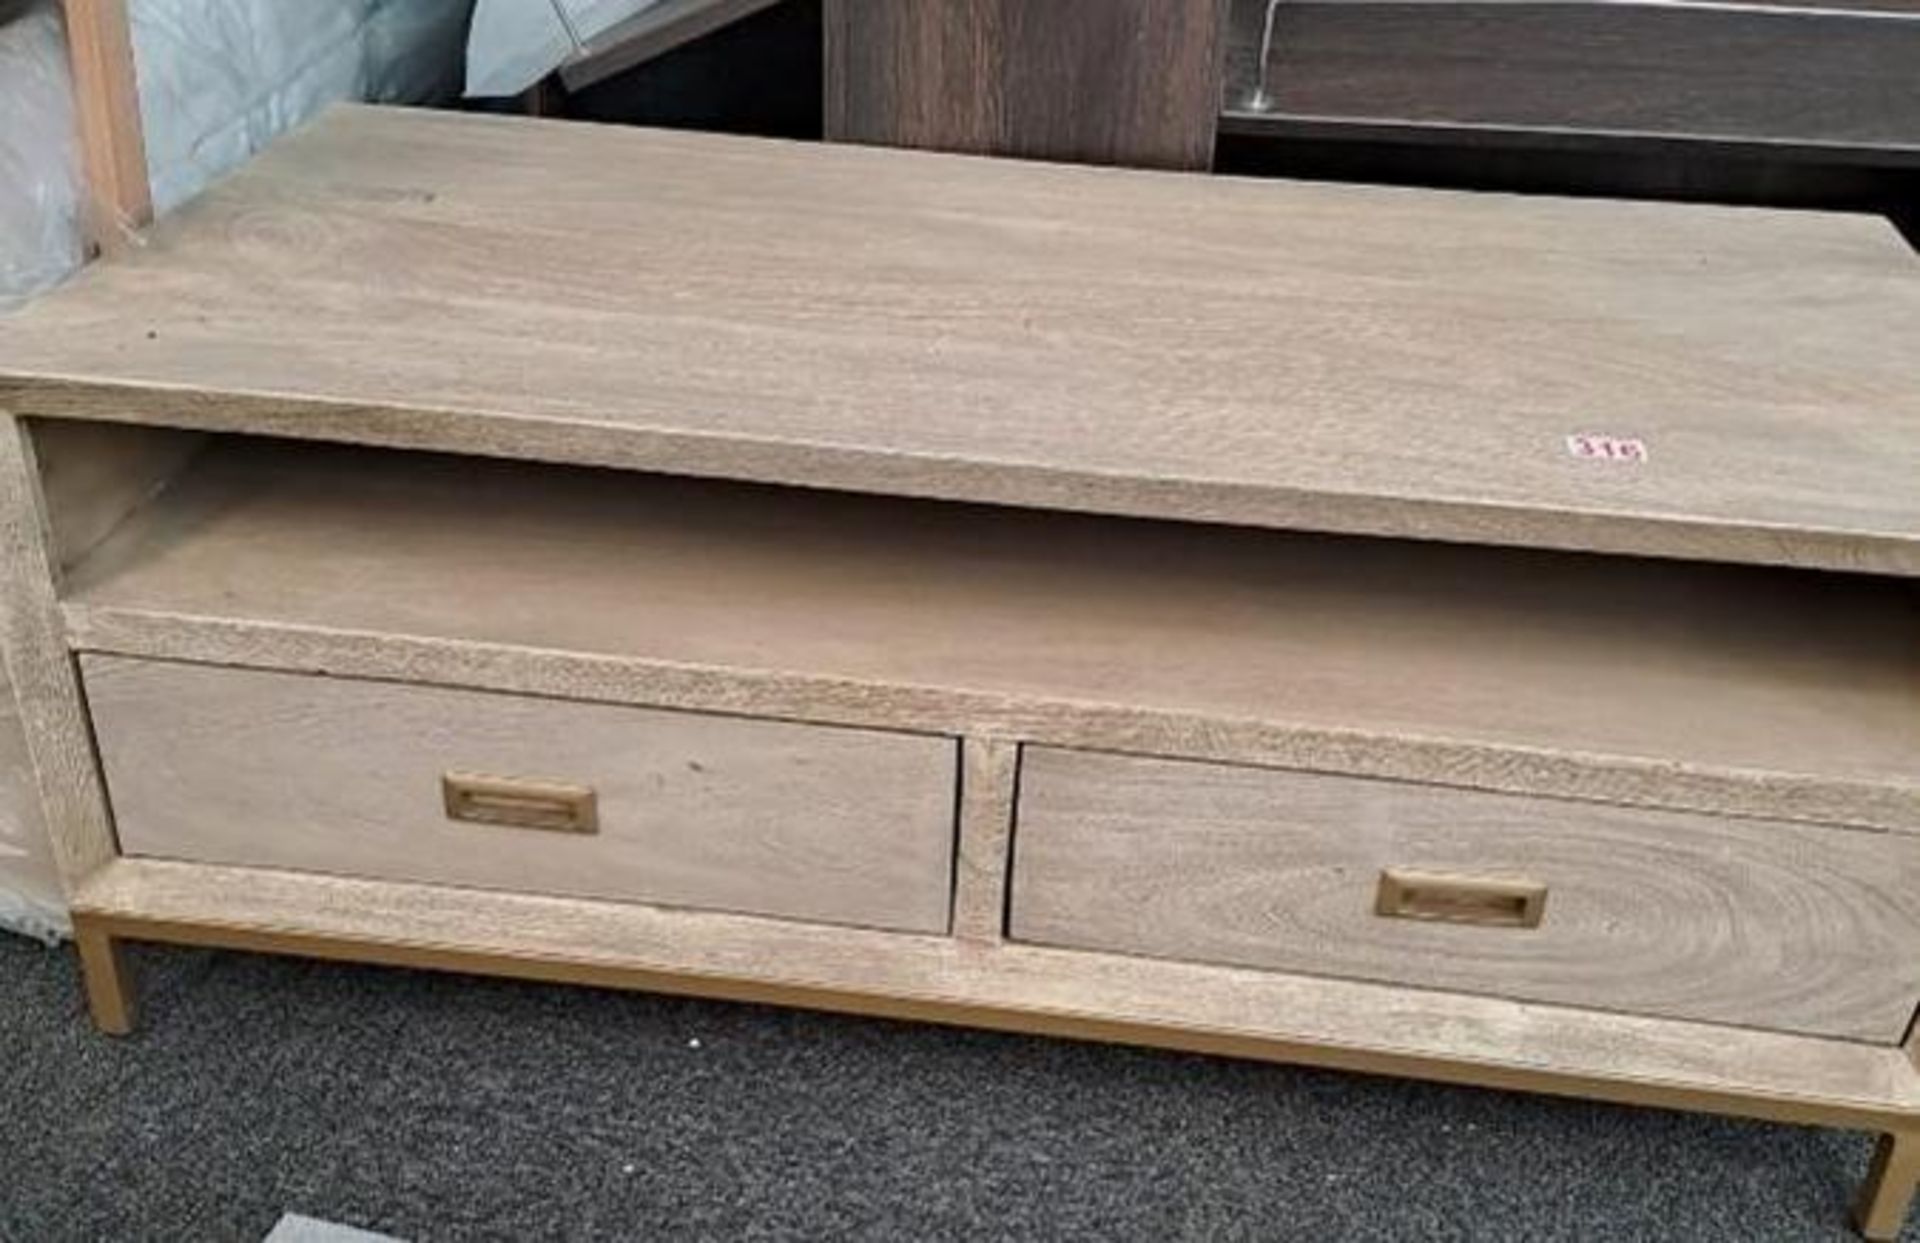 *EX DISPLAY* IFD Oak finish distressed tv/coffee table with 2 drawers and gold metal base.